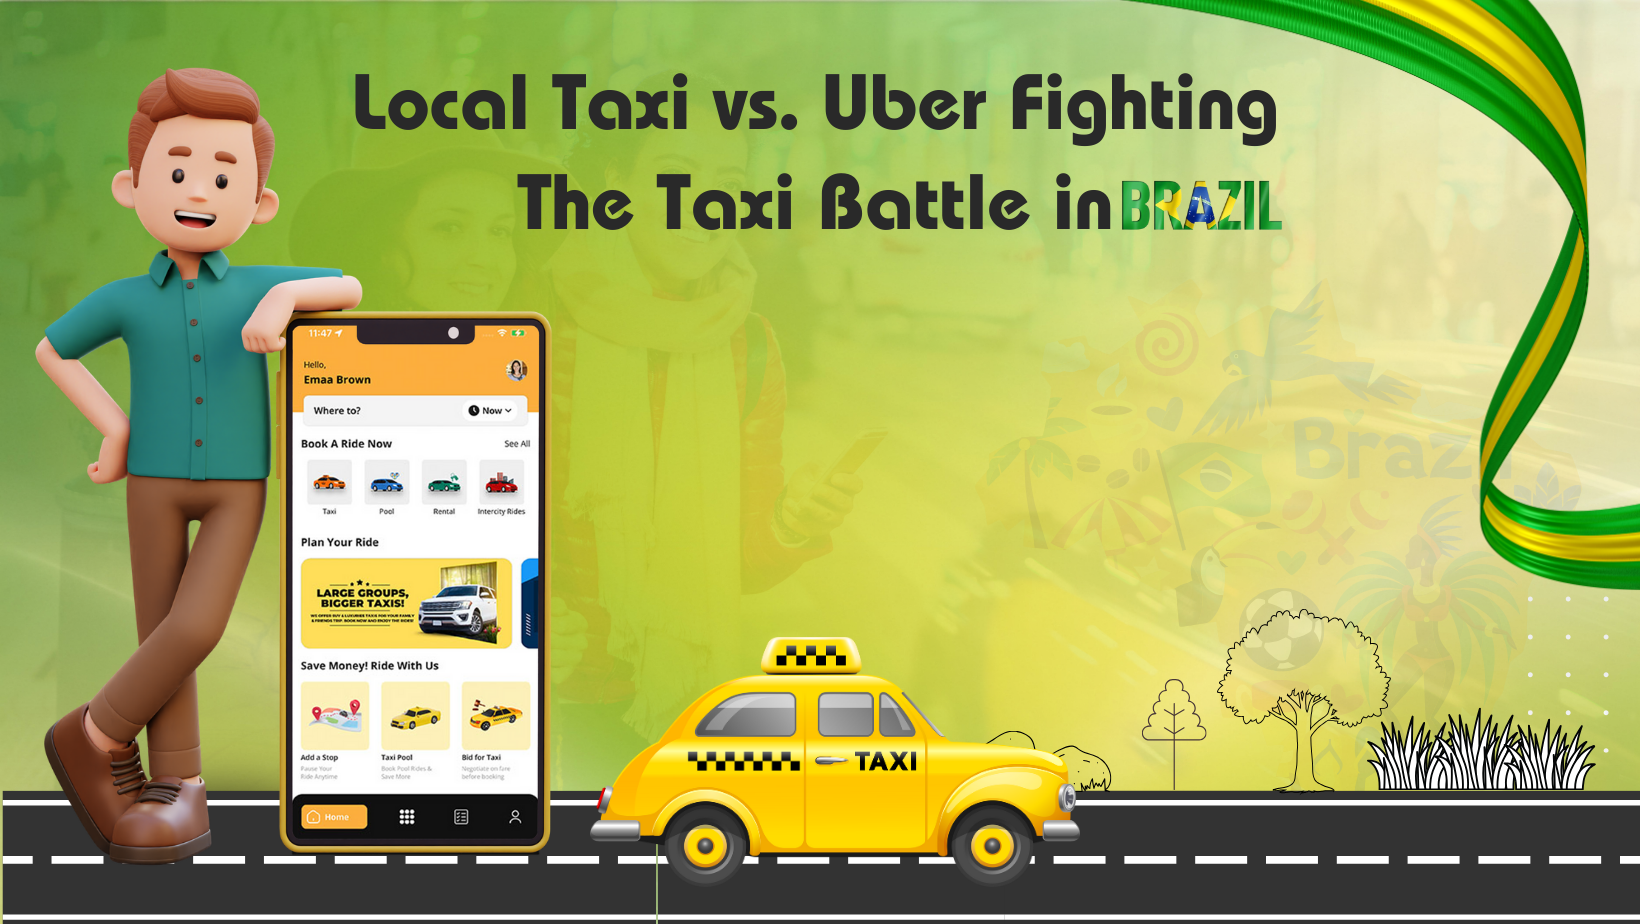 Local Taxi vs. Uber Fighting